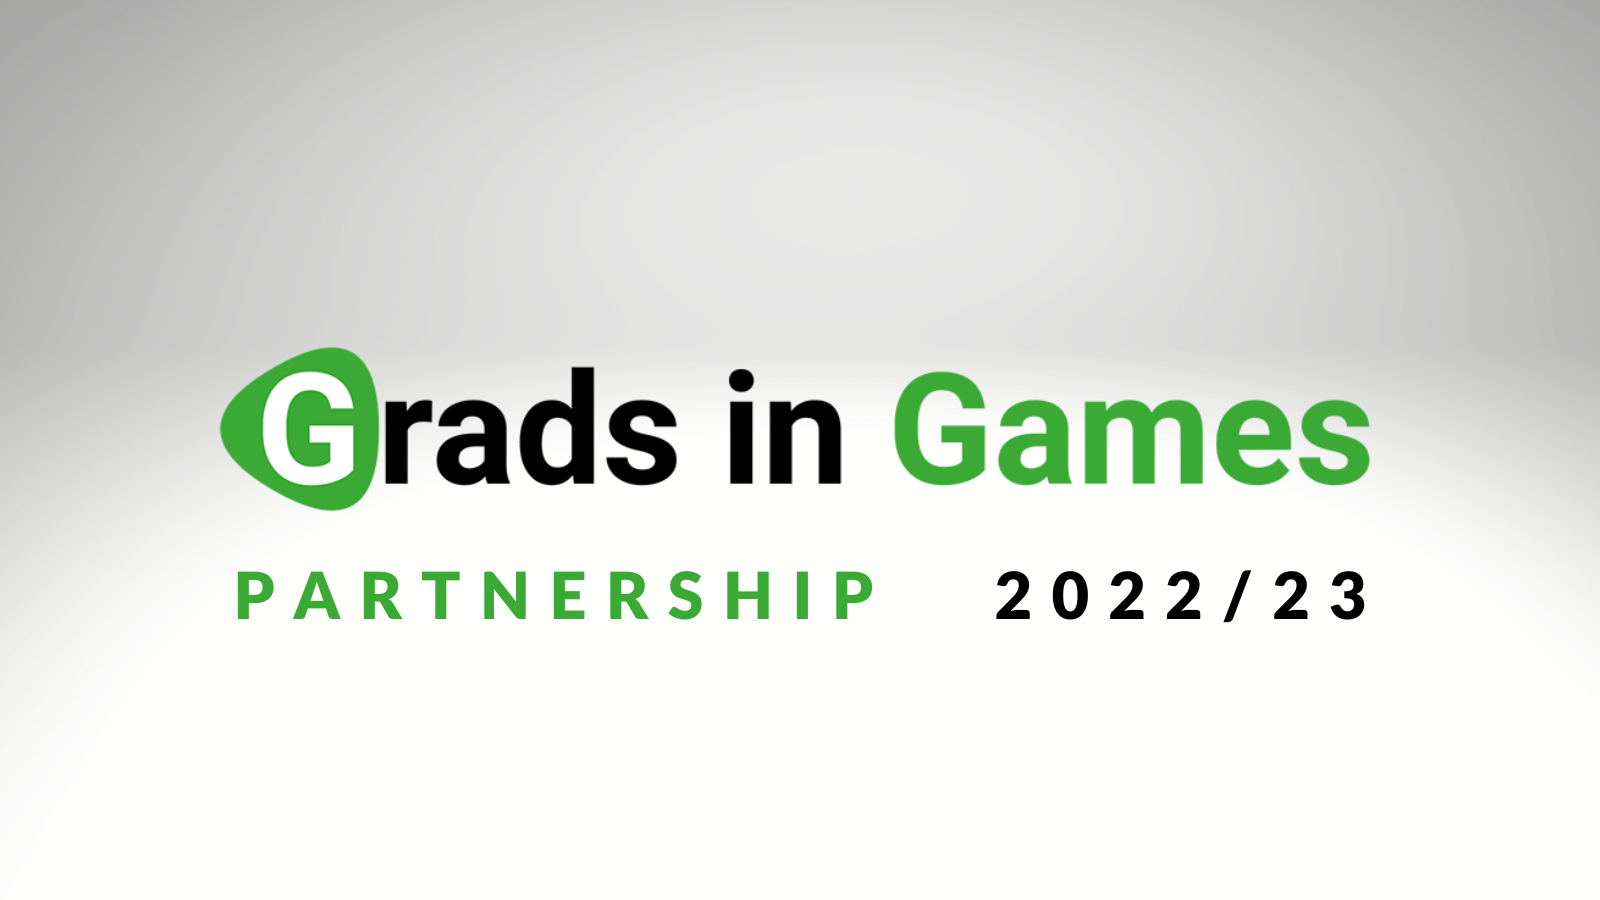 Partner with Grads in Games 2022/23